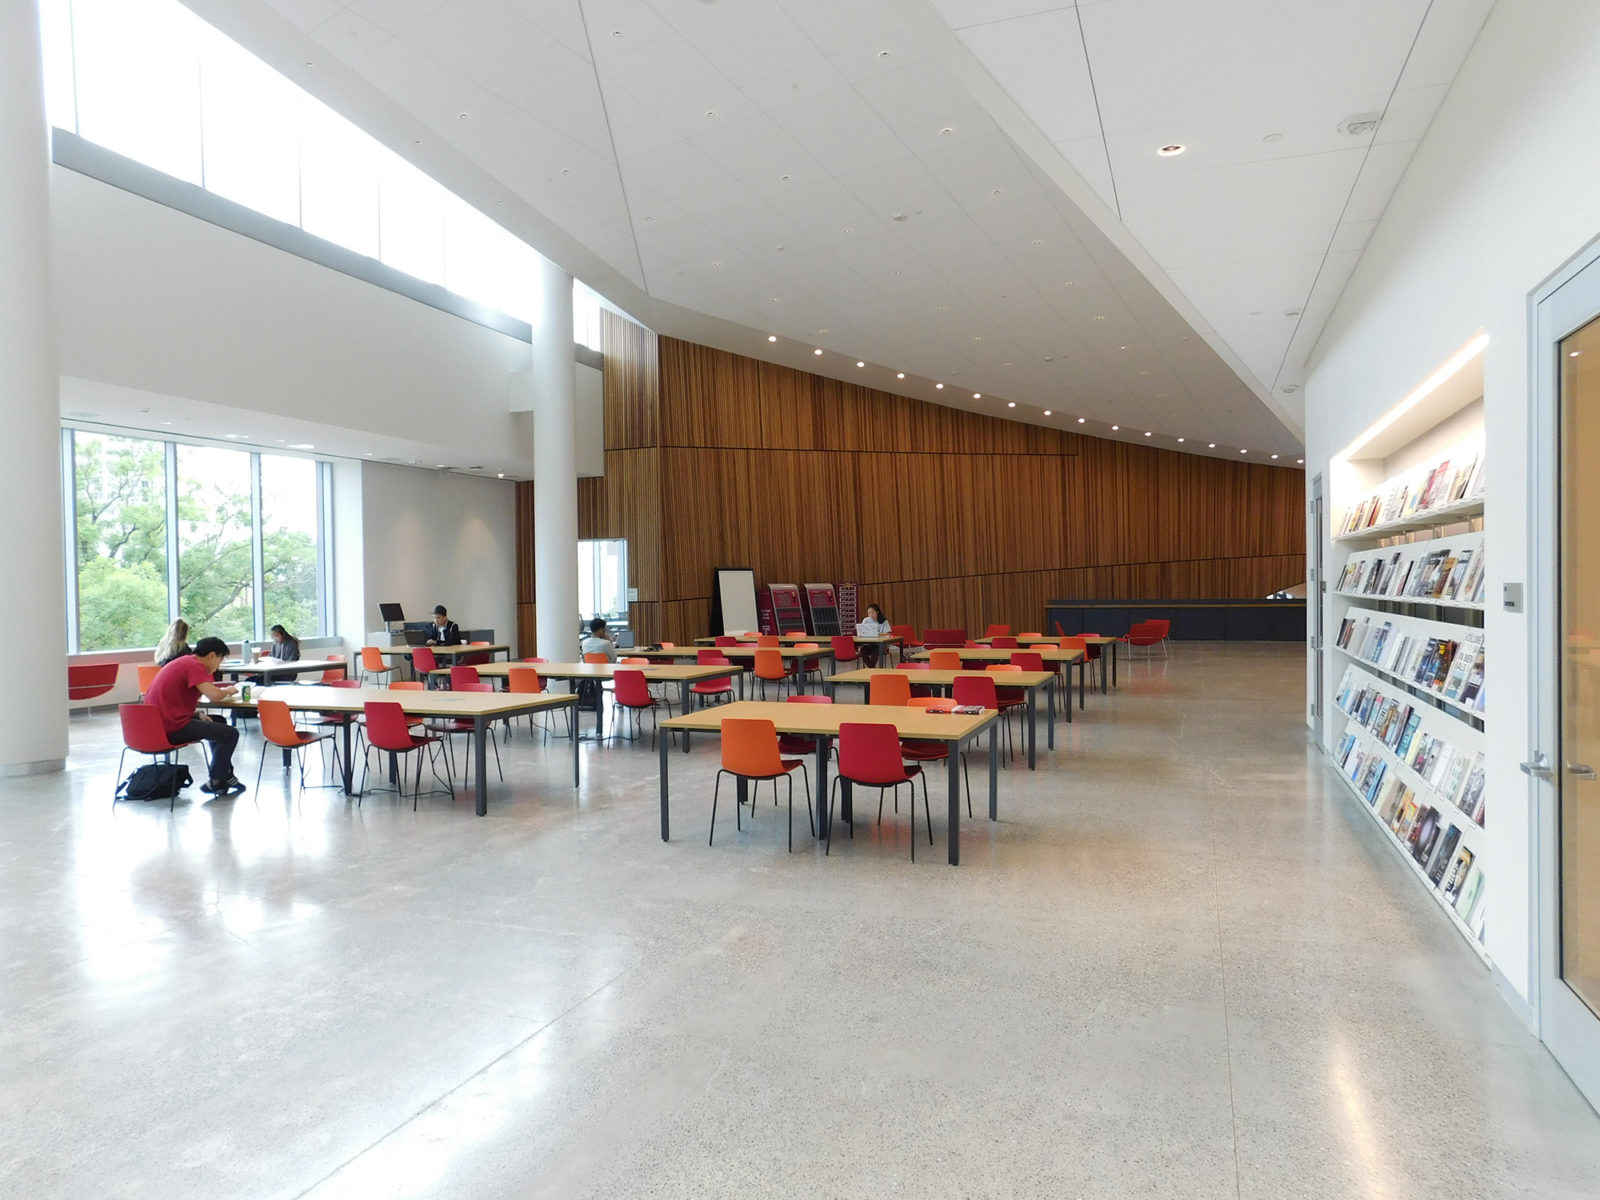 Open space with woodgrain tables and red and orange chairs. Concrete floors, wood accent wall in the background and a wall of books along the right.